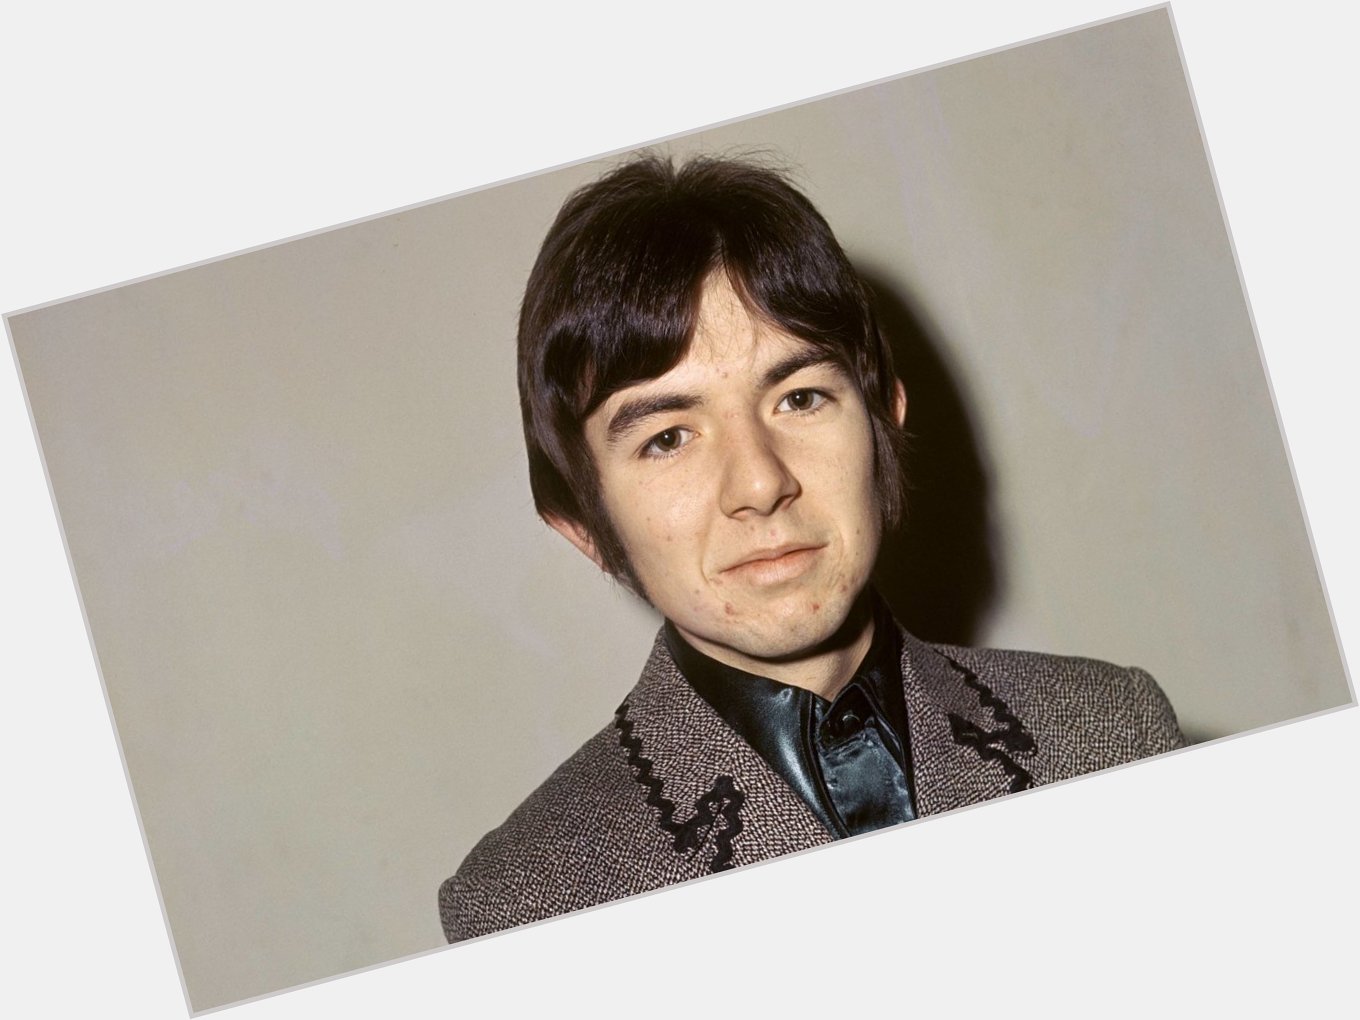 Also Happy Birthday to the late great Ronnie Lane xx 